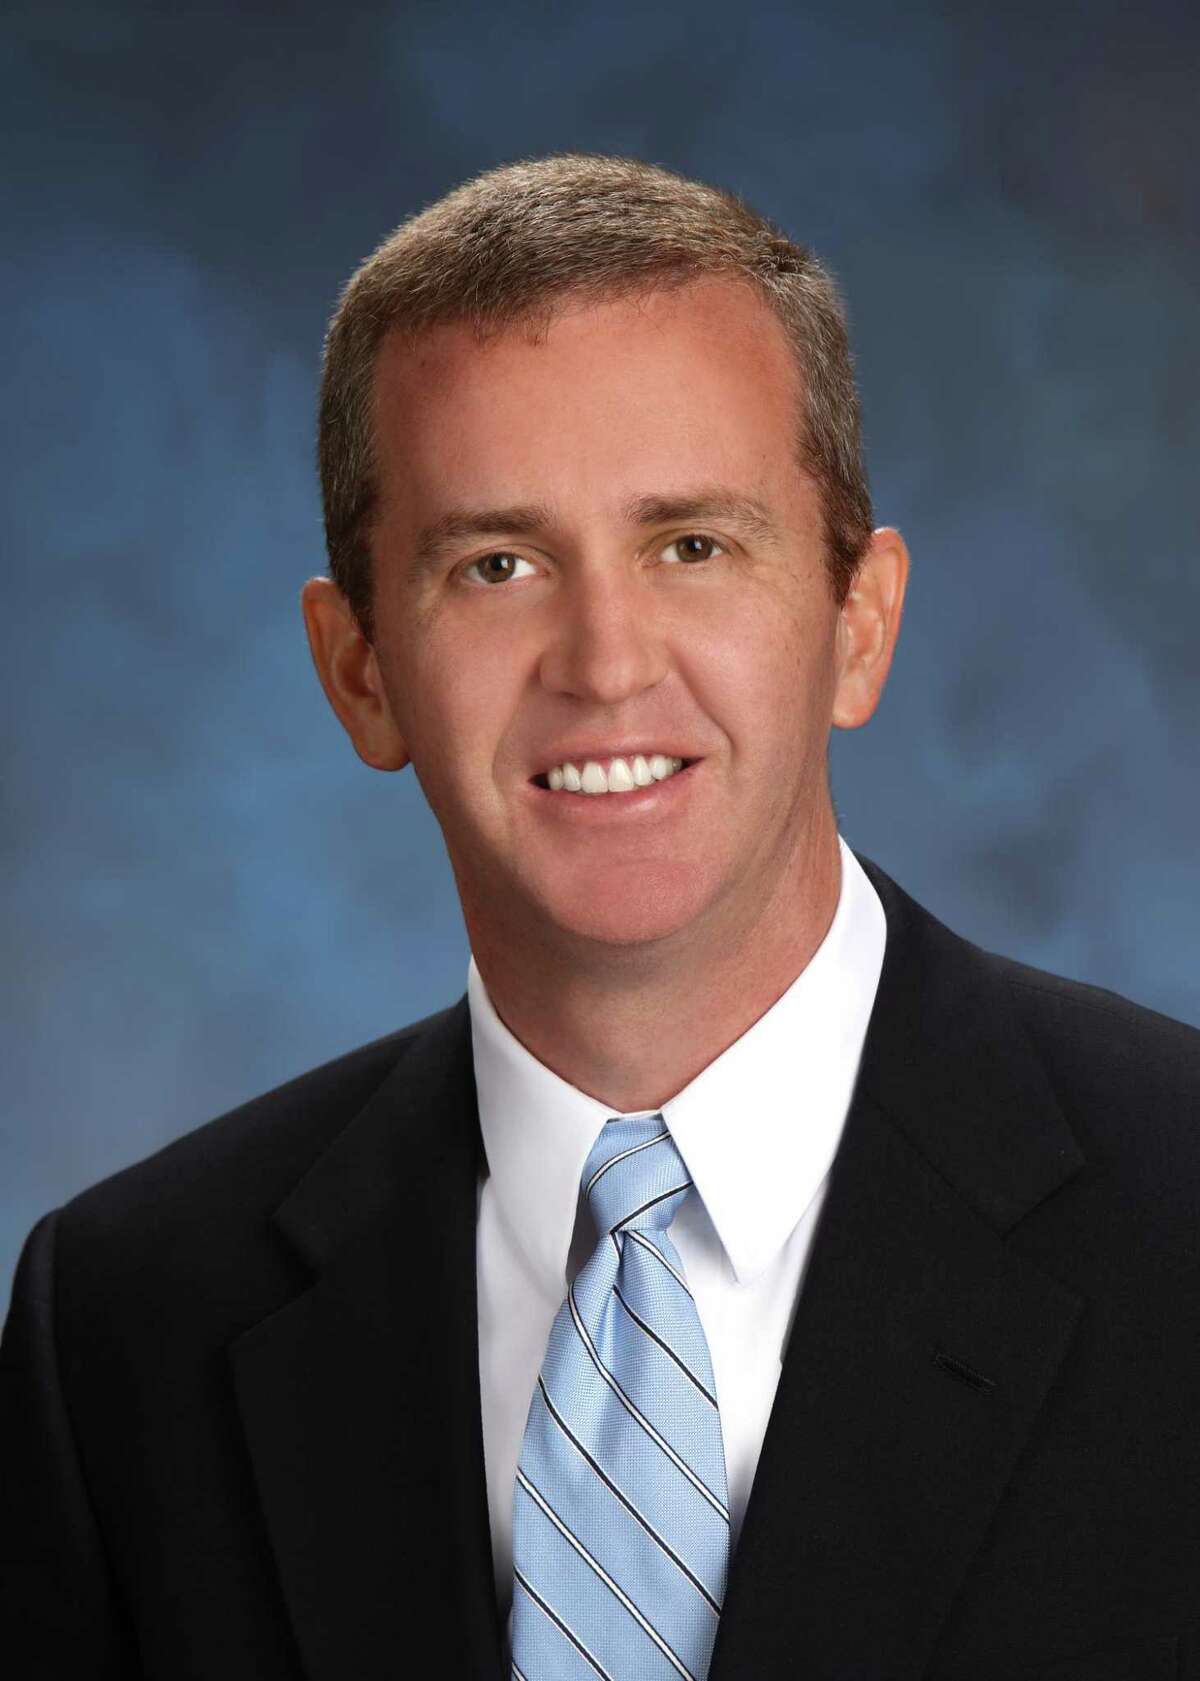 Justin Doss, president and CEO of Baptist Hospitals of Southeast Texas